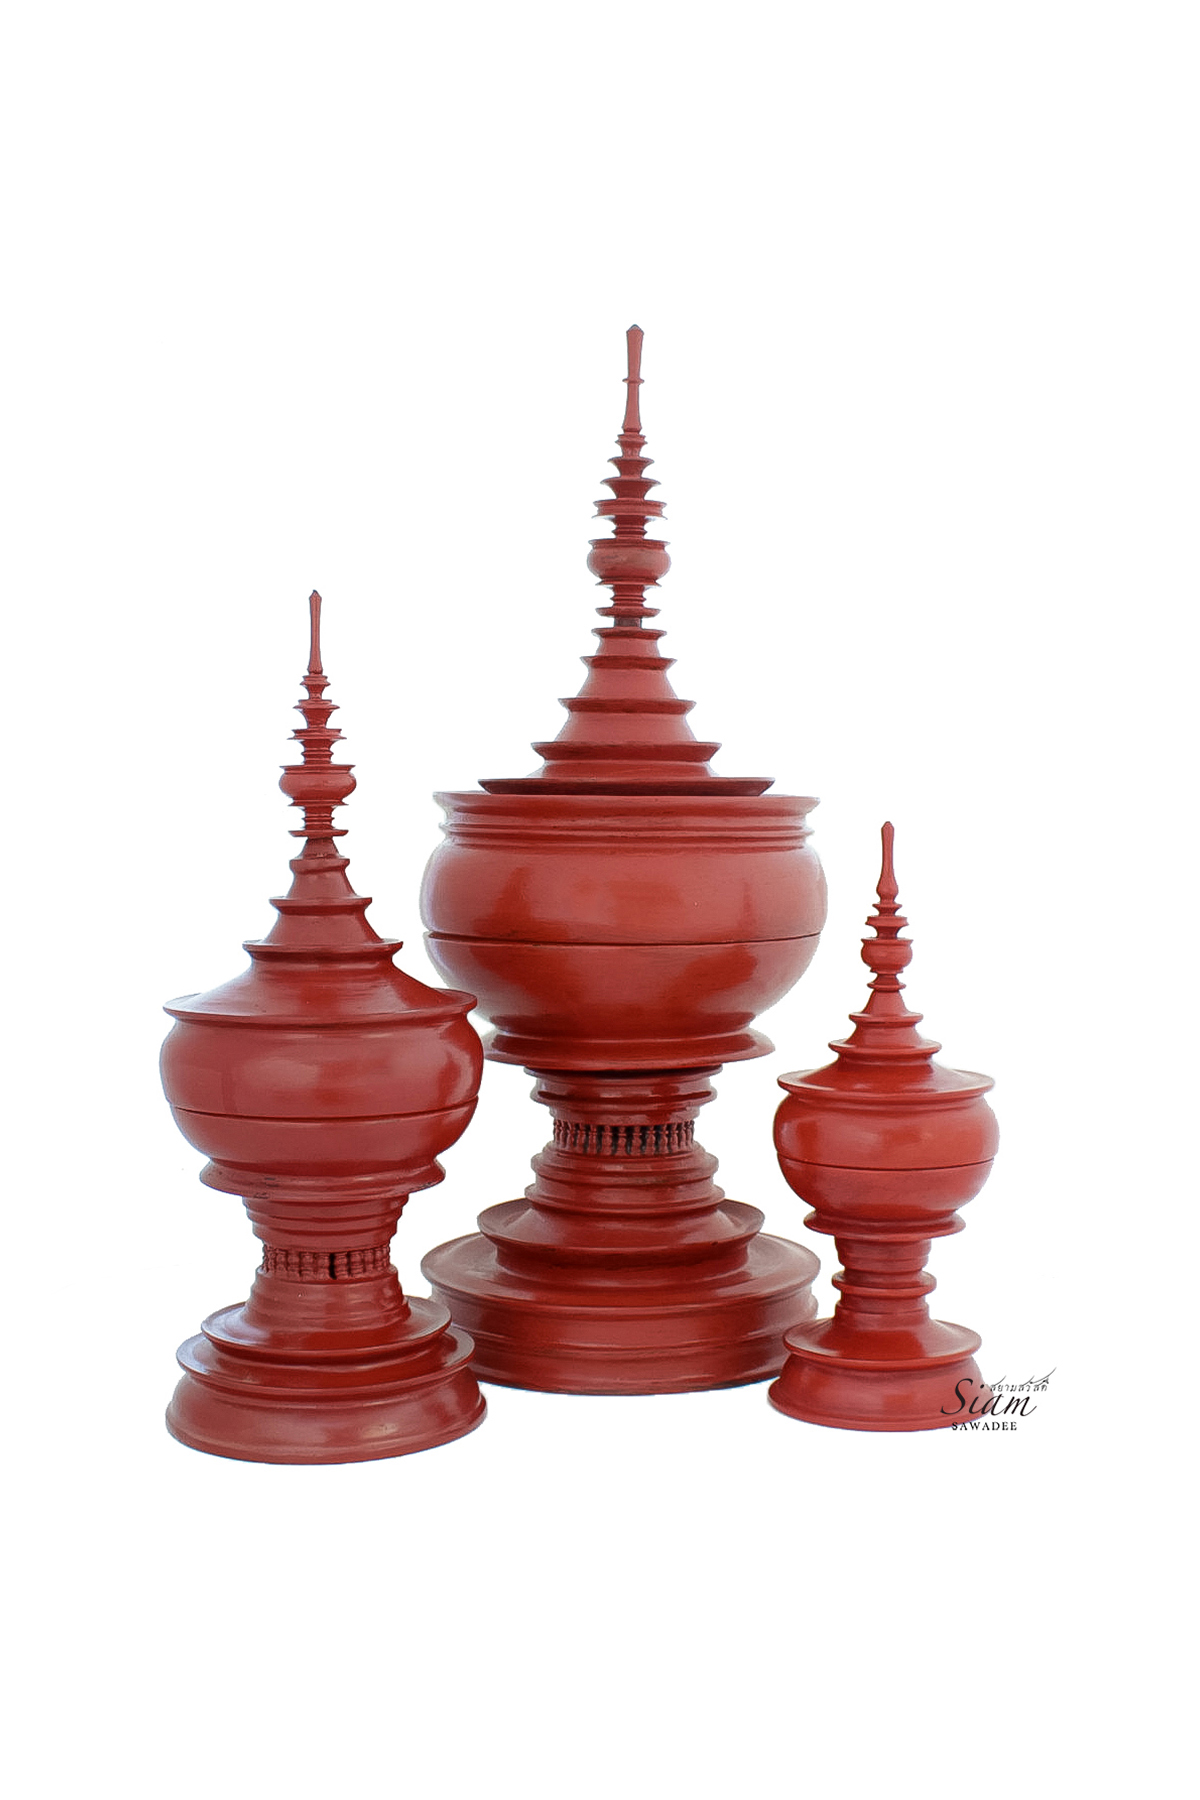 Buddhist-Food-Offering-Vessel-Handmade-Traditional-Stupa-shaped-in-red-color-from-Myanmar-Oriental-Decor